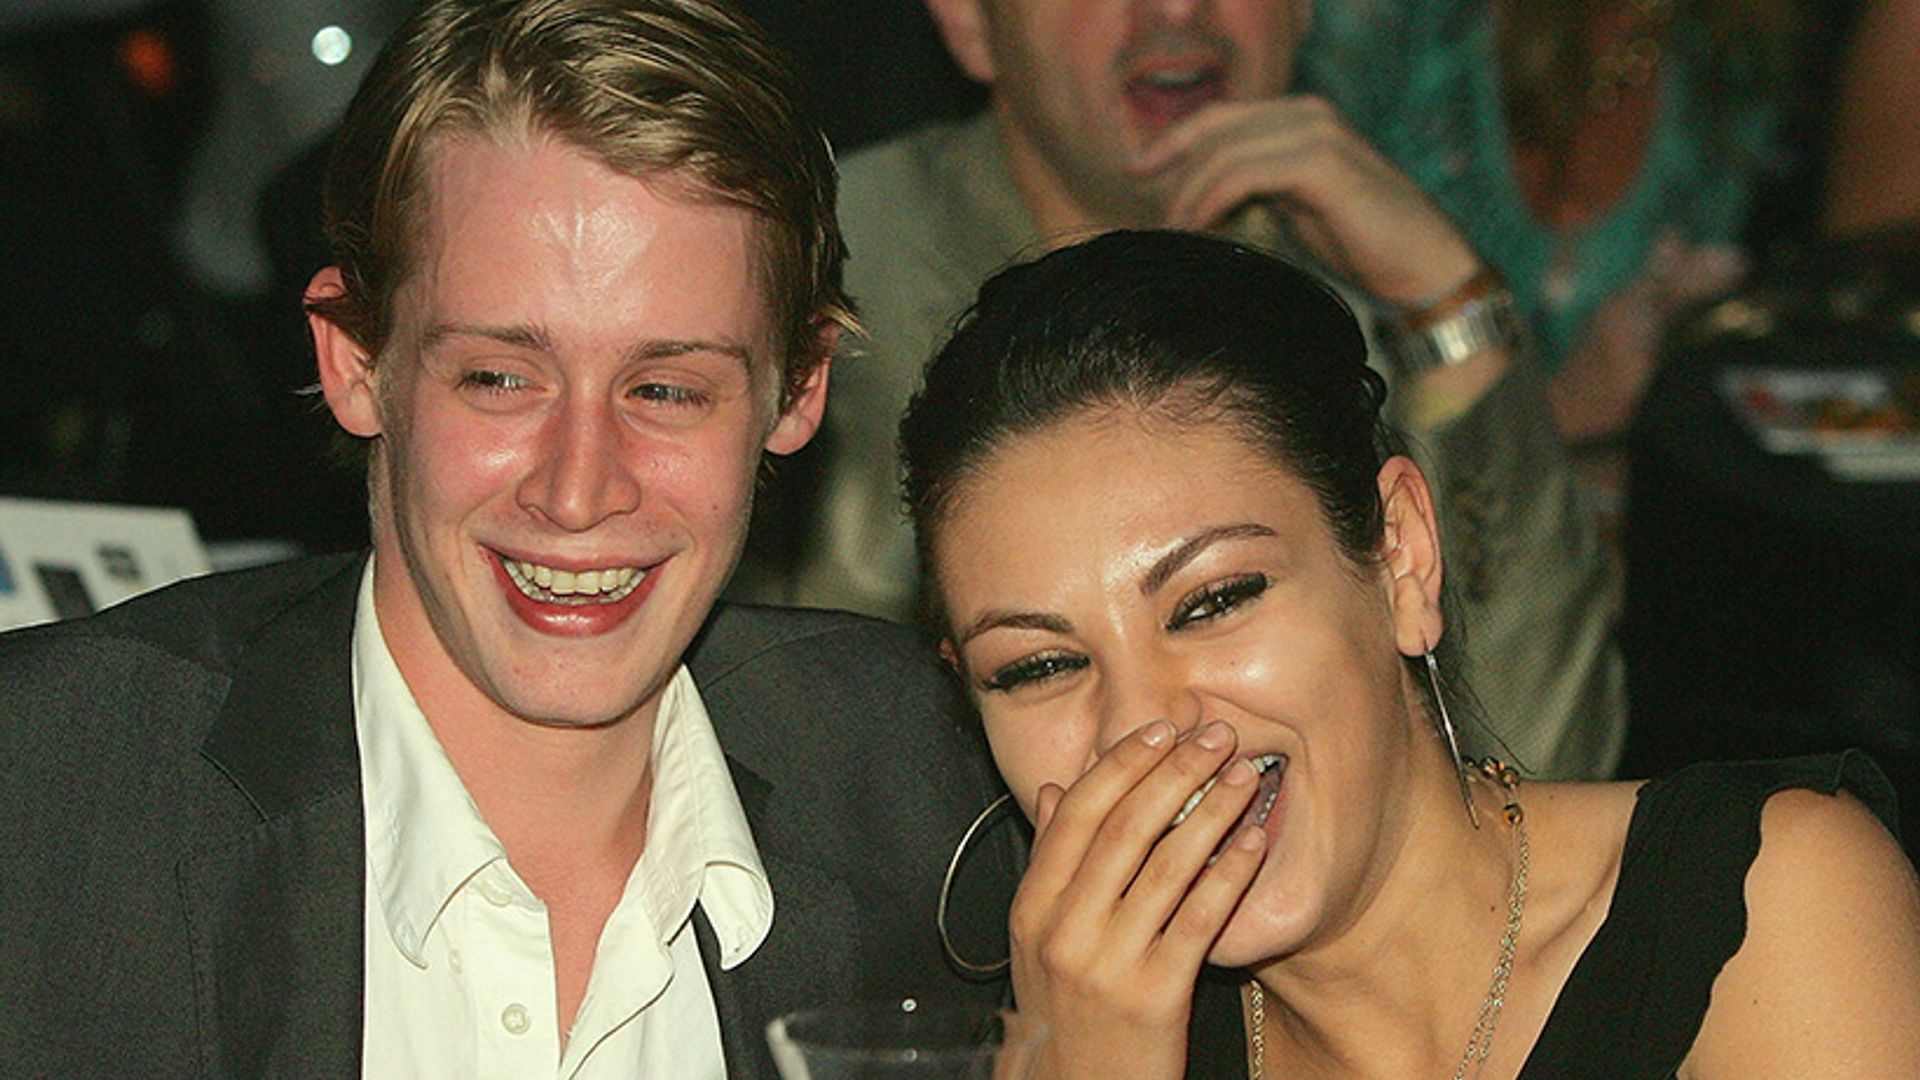 Mila Kunis opens up about her romance with Macaulay Culkin